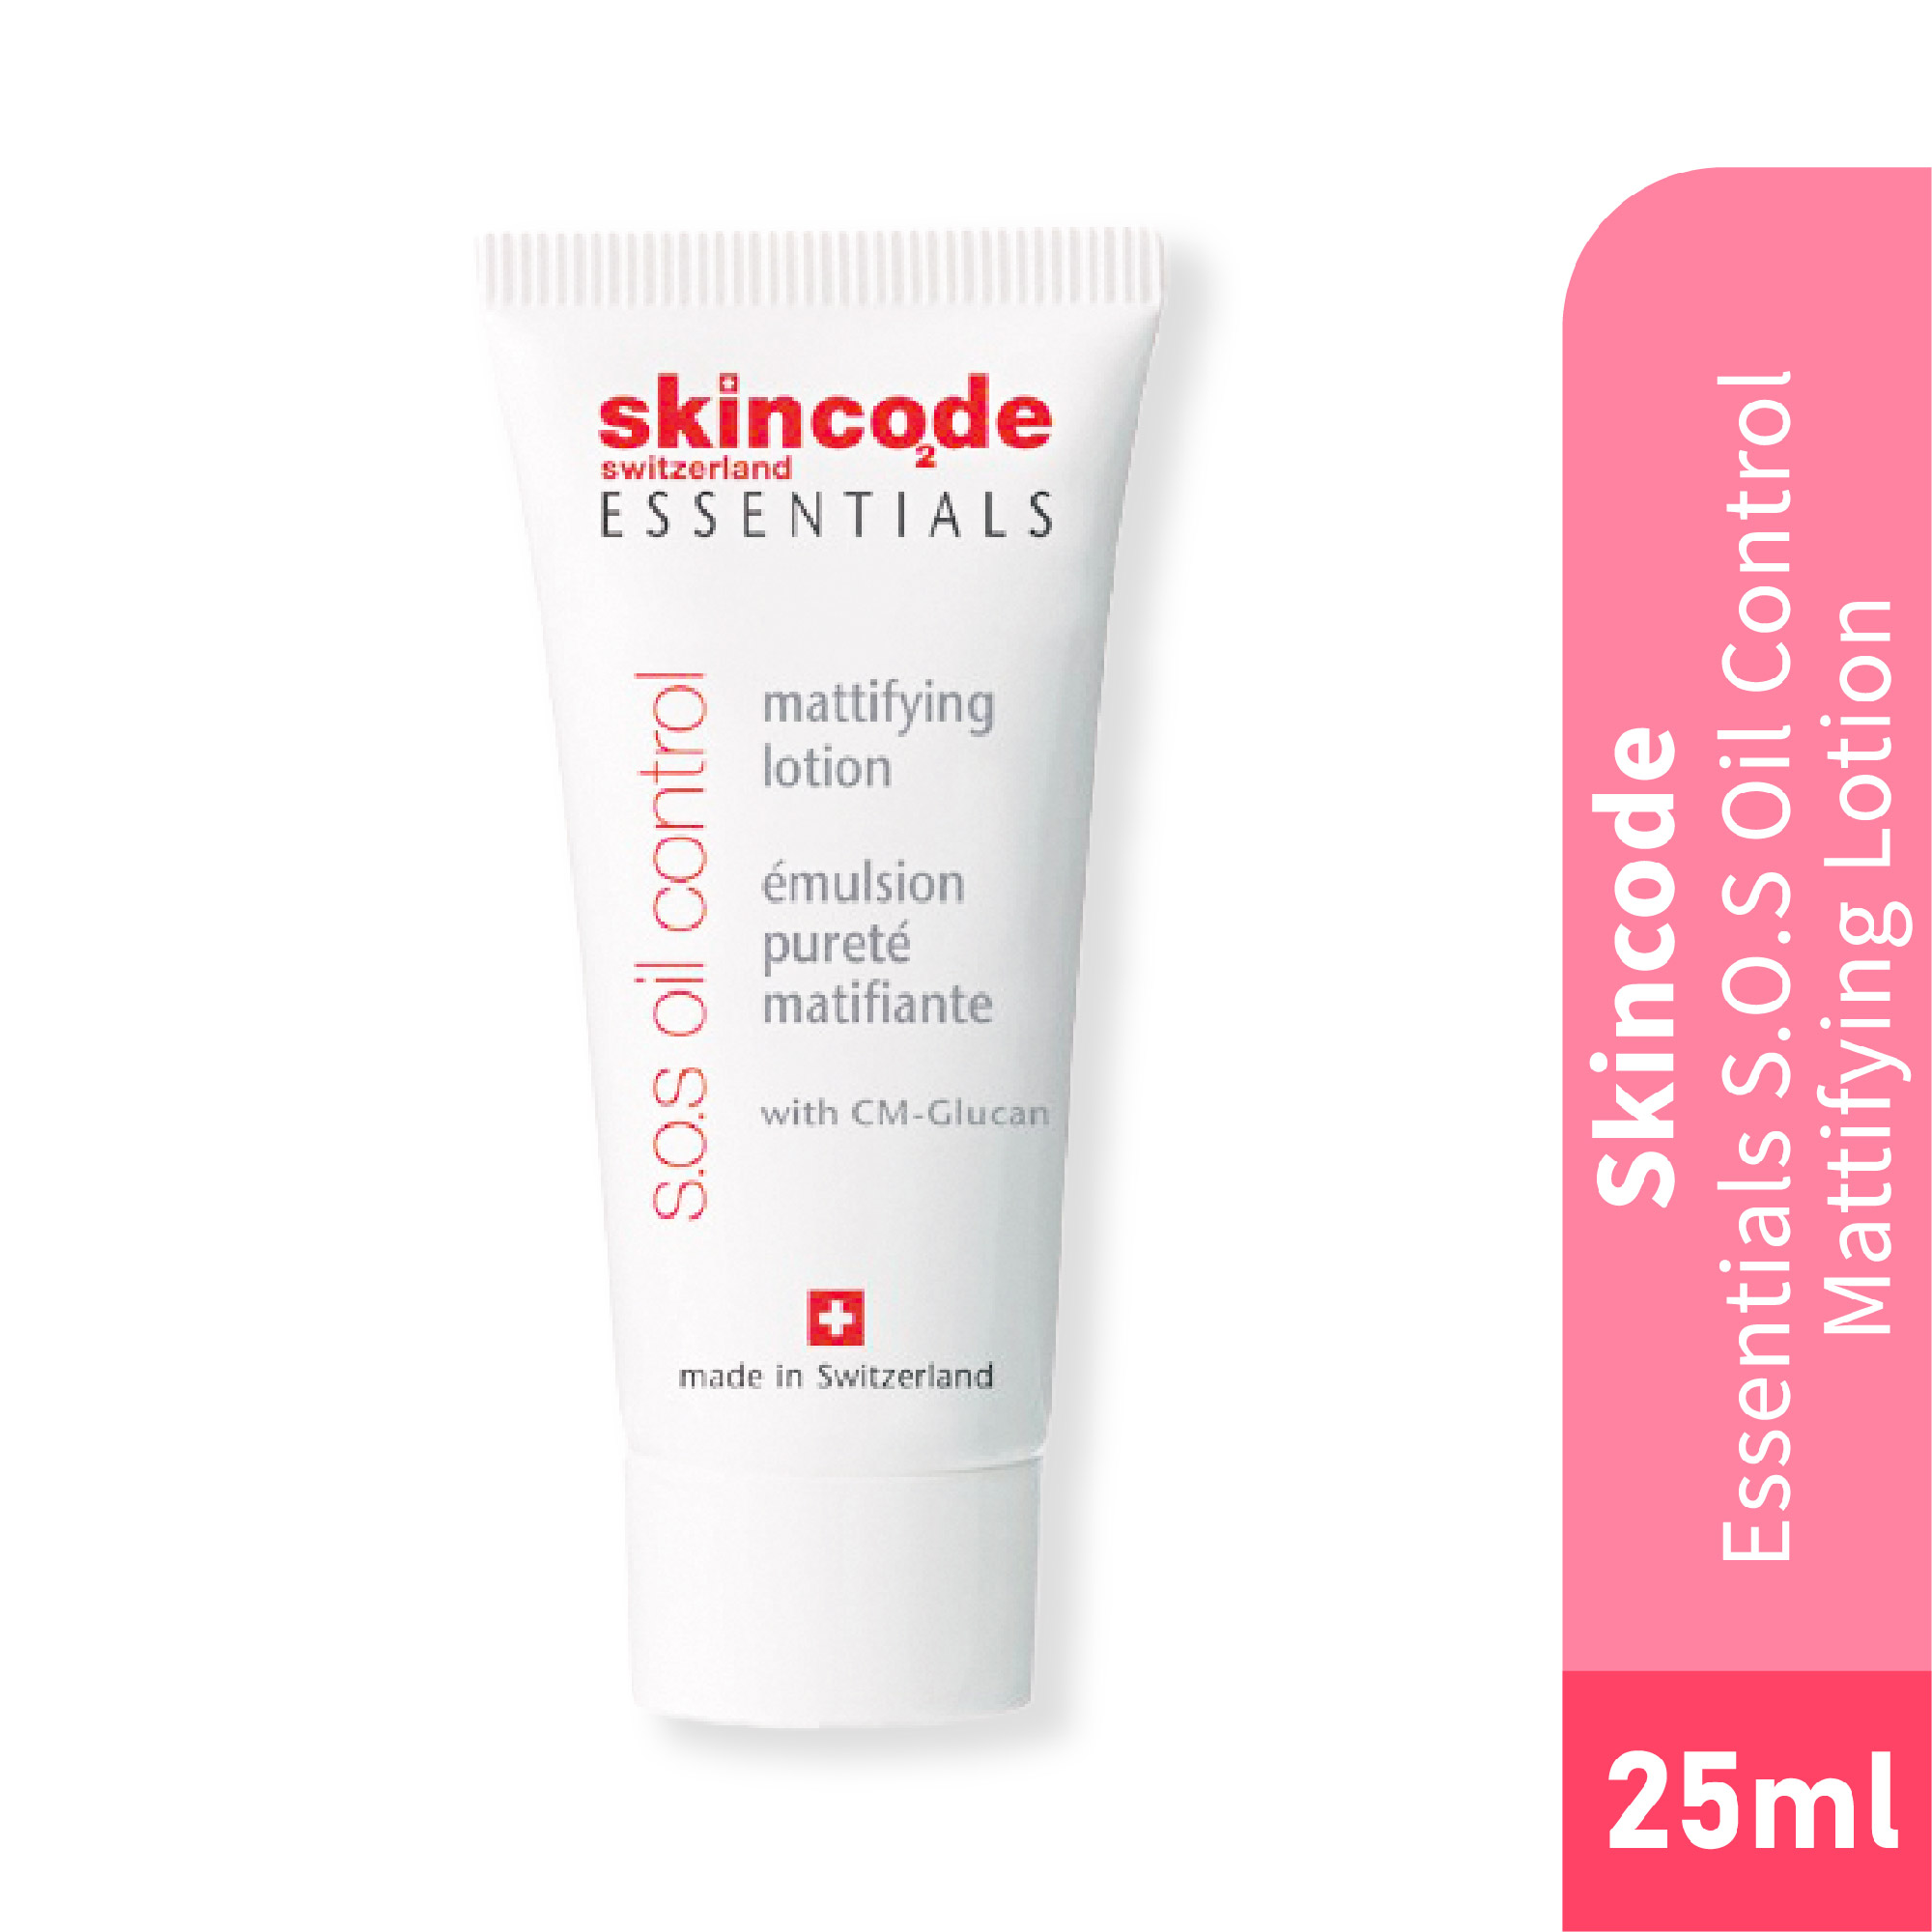 Skincode Essentials S.O.S Oil Control Mattifying Lotion 25ml